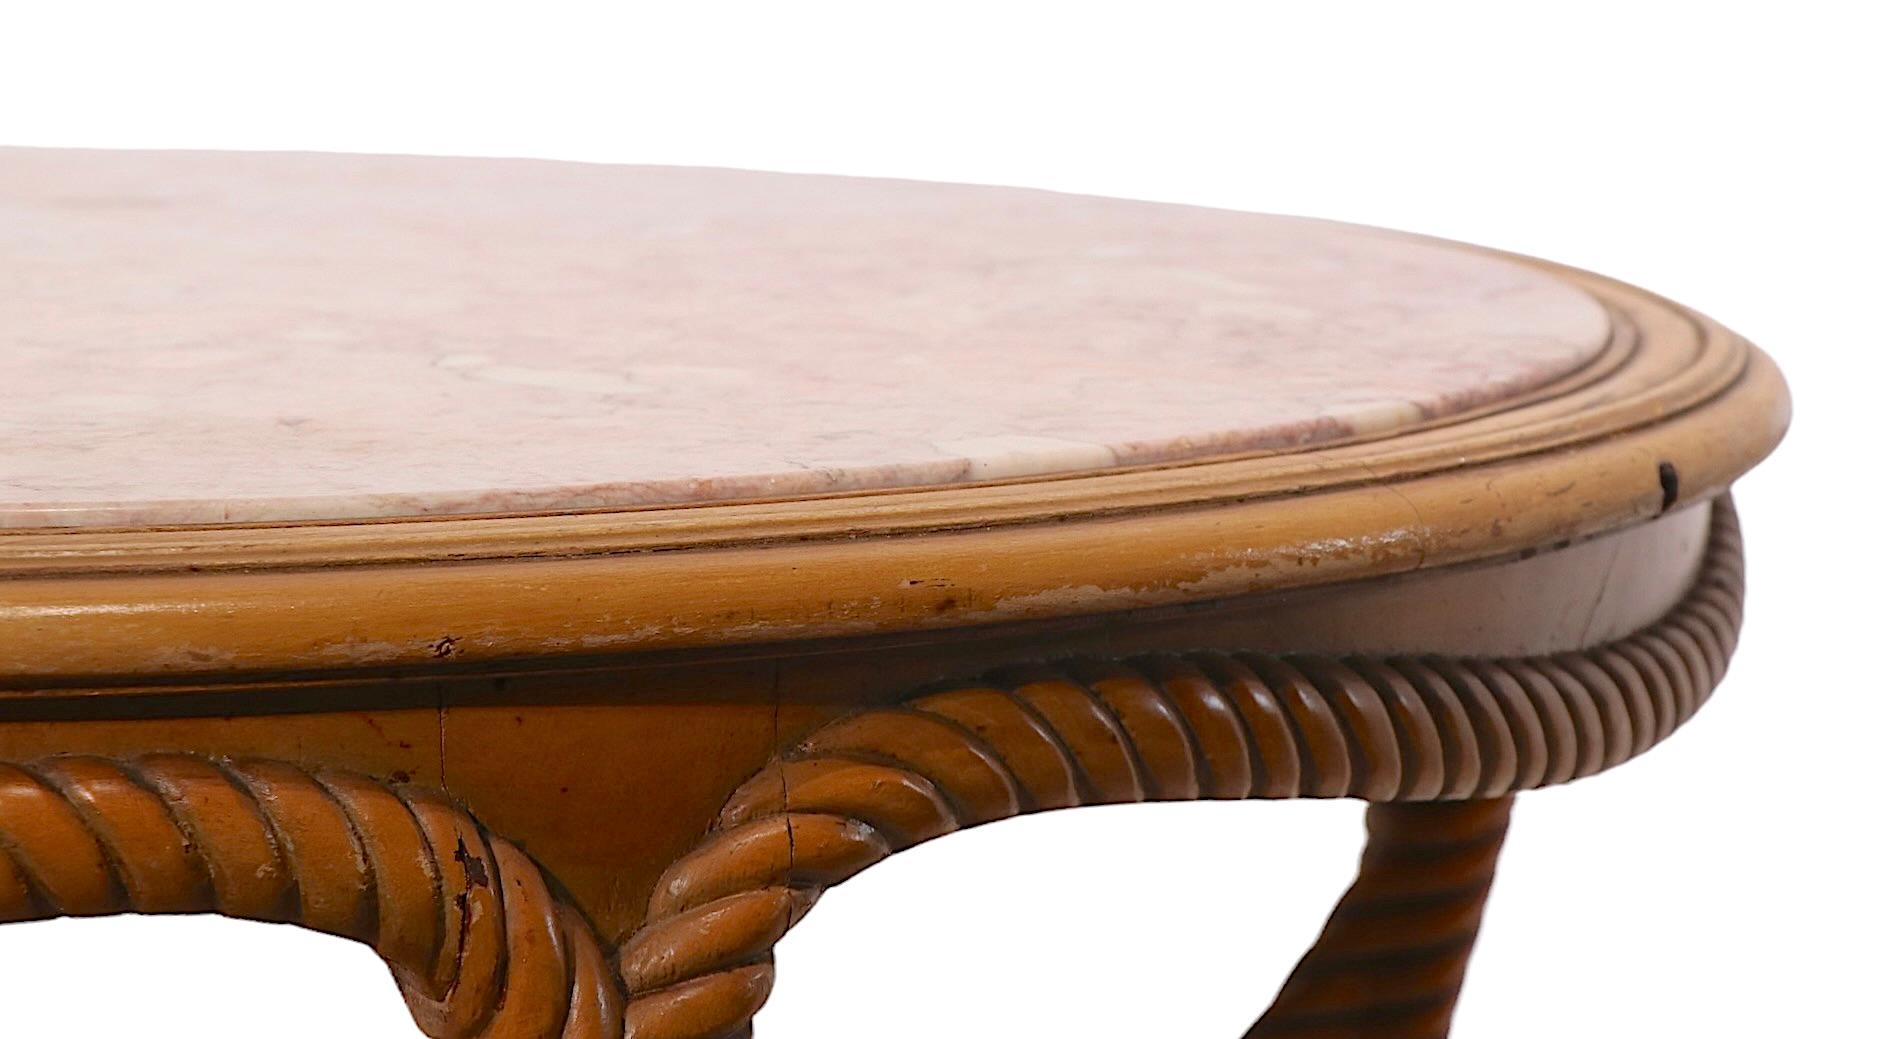 Stylish rope twist carved wood coffee table with rouge marble top. The table is in good, original, estate condition, showing only light cosmetic wear, normal and consistent with age (slight flaw in the finish at the top edge, please see images). 
